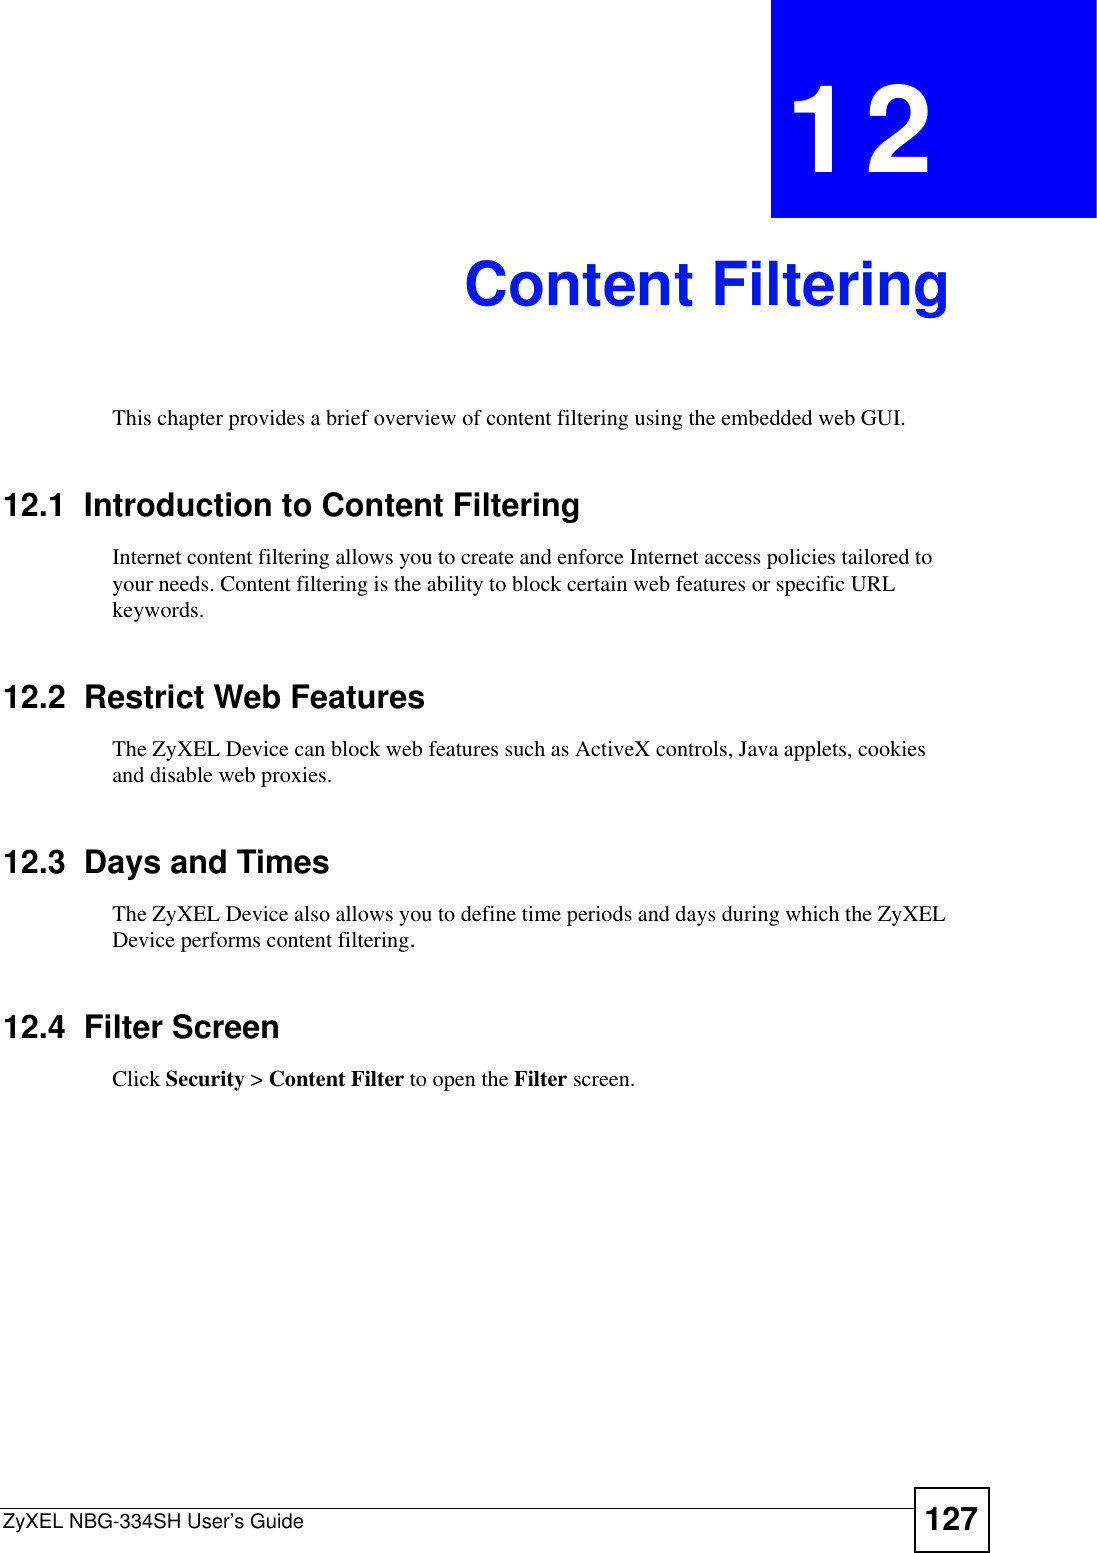 ZyXEL NBG-334SH User’s Guide 127CHAPTER 12Content FilteringThis chapter provides a brief overview of content filtering using the embedded web GUI.12.1  Introduction to Content FilteringInternet content filtering allows you to create and enforce Internet access policies tailored to your needs. Content filtering is the ability to block certain web features or specific URL keywords.12.2  Restrict Web FeaturesThe ZyXEL Device can block web features such as ActiveX controls, Java applets, cookies and disable web proxies. 12.3  Days and TimesThe ZyXEL Device also allows you to define time periods and days during which the ZyXEL Device performs content filtering.12.4  Filter ScreenClick Security &gt; Content Filter to open the Filter screen. 